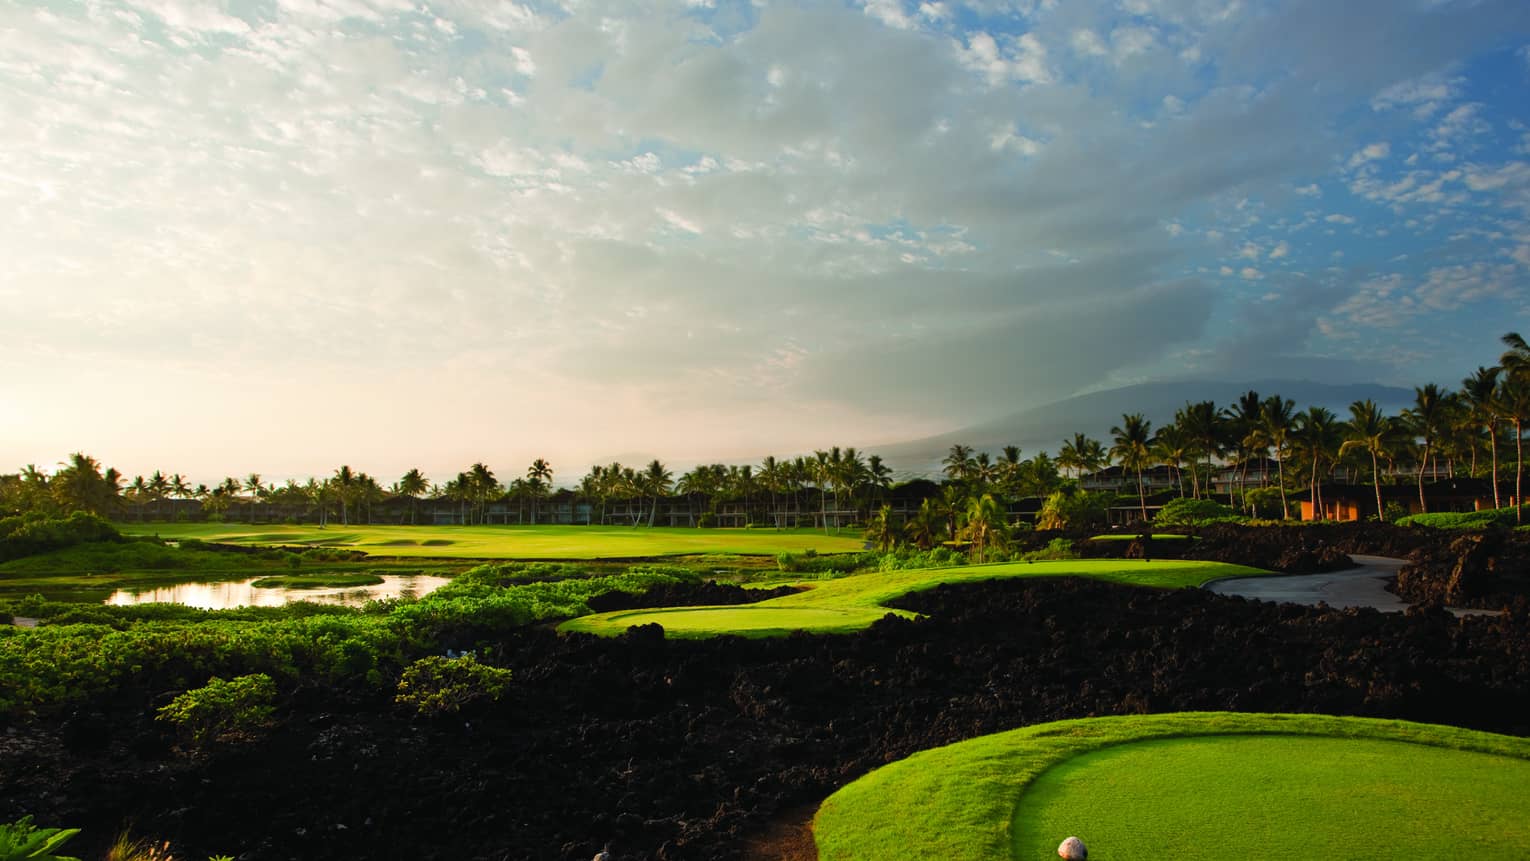 A picturesque golf course featuring bright green fairways, shrubs and distant palm trees under a rose-tinted clouded sky.